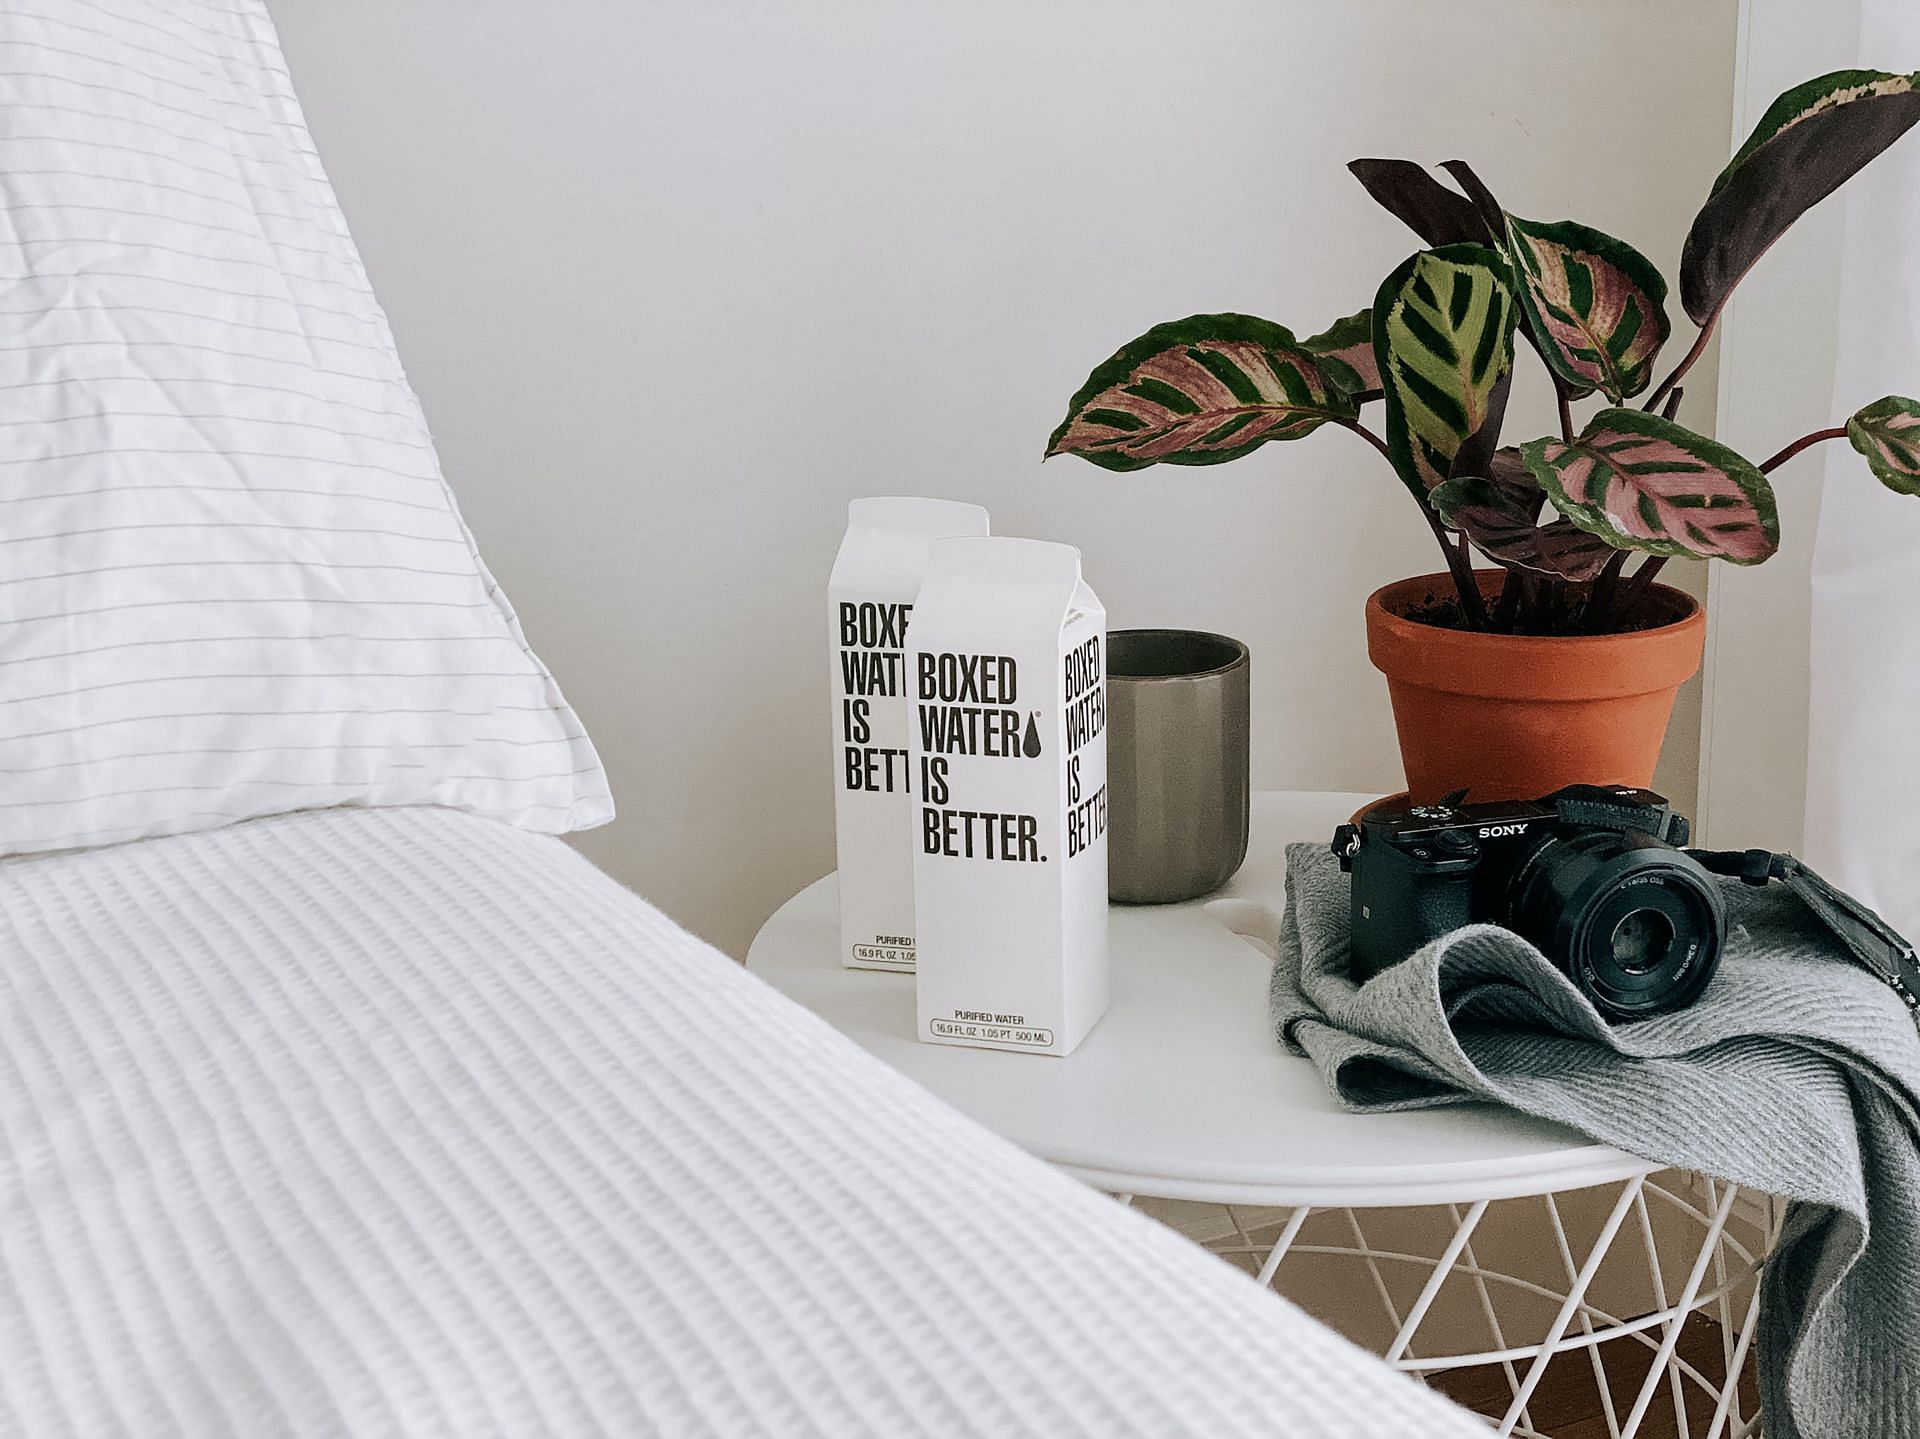 Keep yourself hydrated. (Image via Unsplash/Boxed Water is Better)